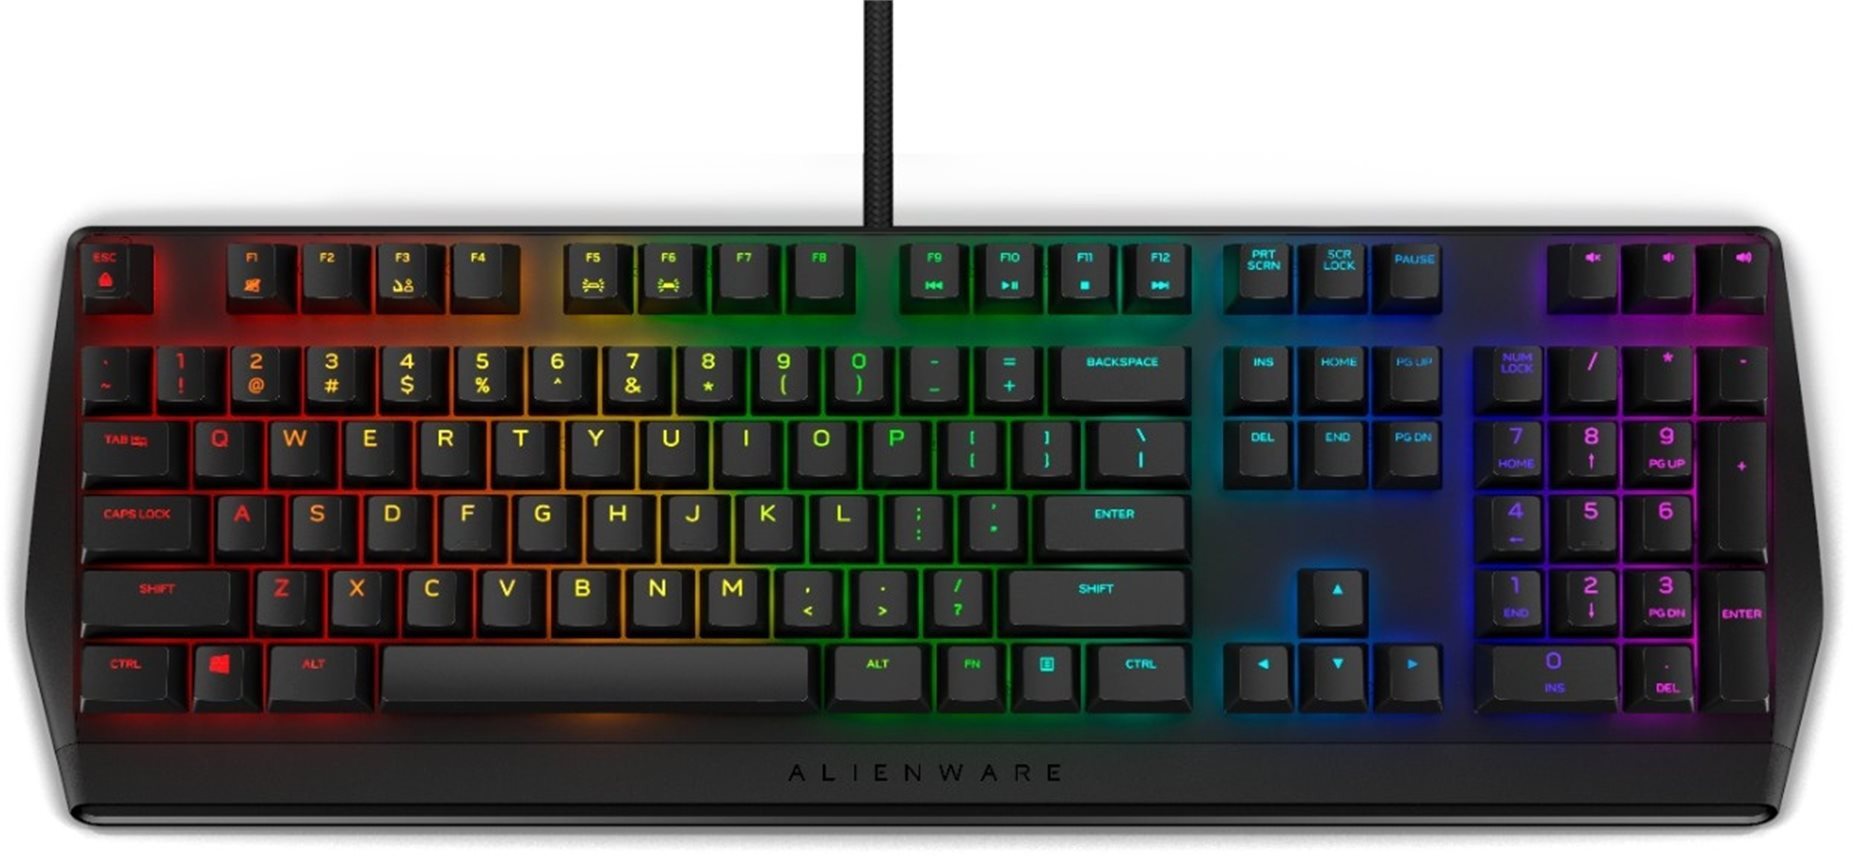 Dell Alienware AW410K Mechanical RGB Gaming Keyboard - US